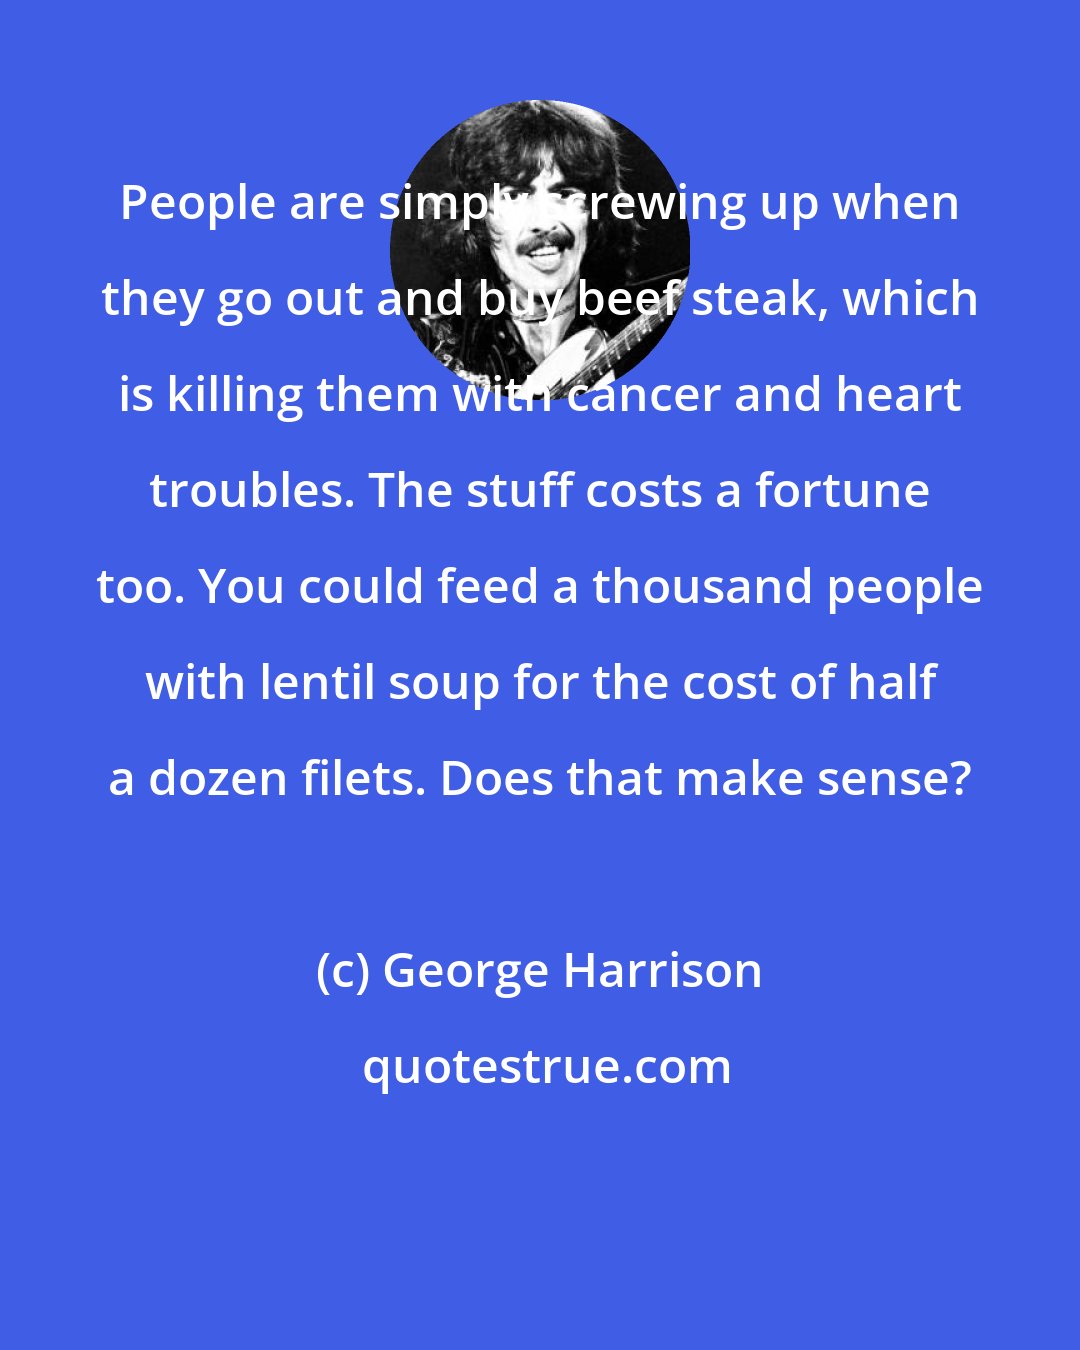 George Harrison: People are simply screwing up when they go out and buy beef steak, which is killing them with cancer and heart troubles. The stuff costs a fortune too. You could feed a thousand people with lentil soup for the cost of half a dozen filets. Does that make sense?